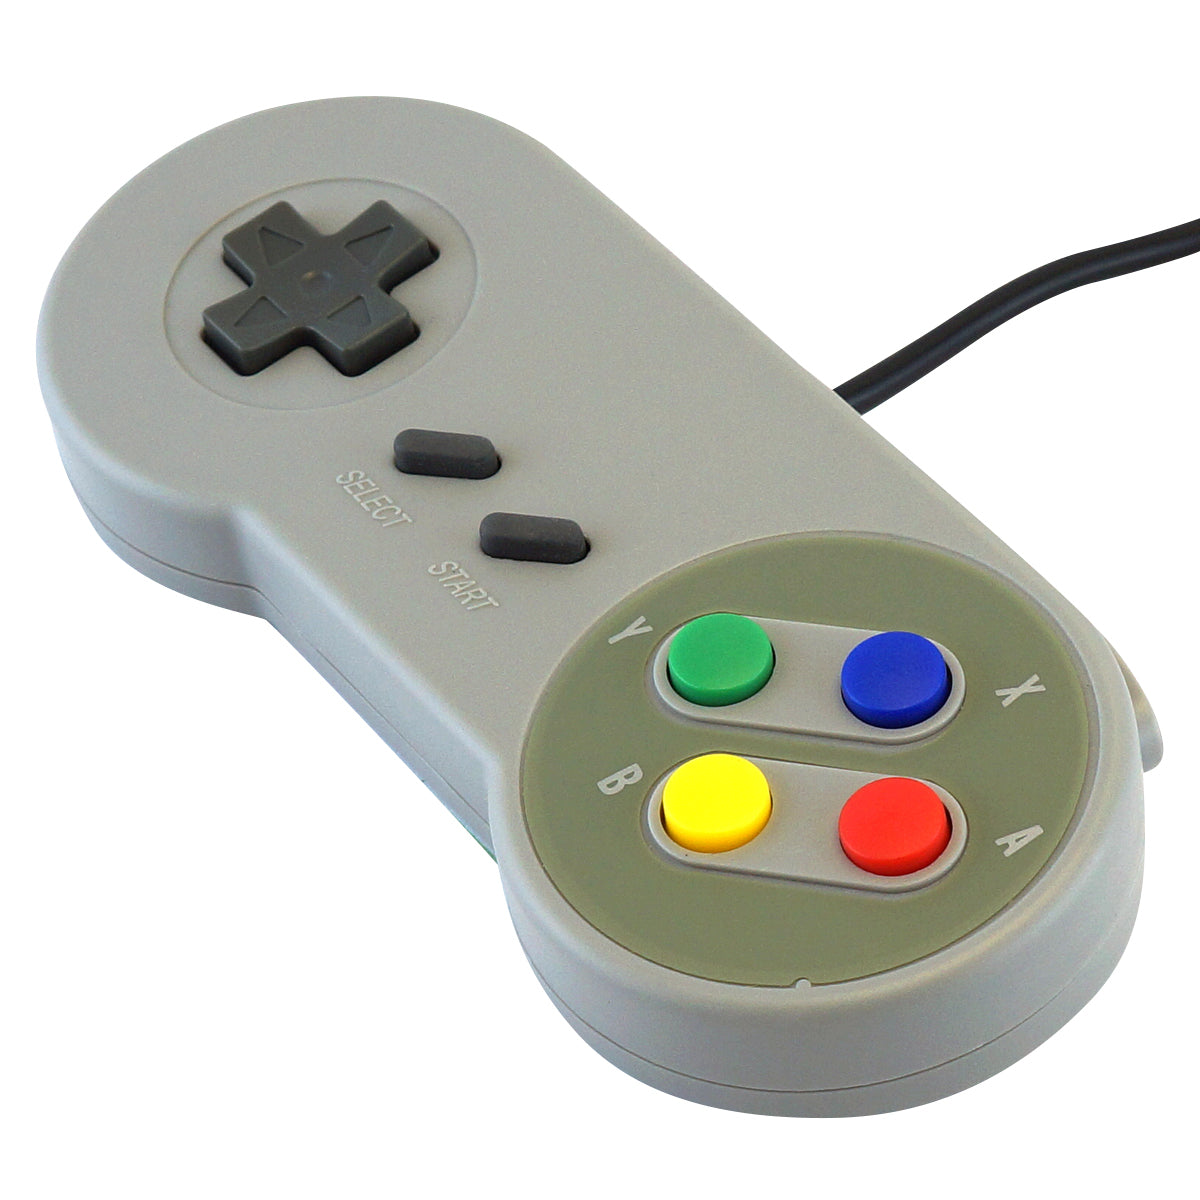 snes usb controller review